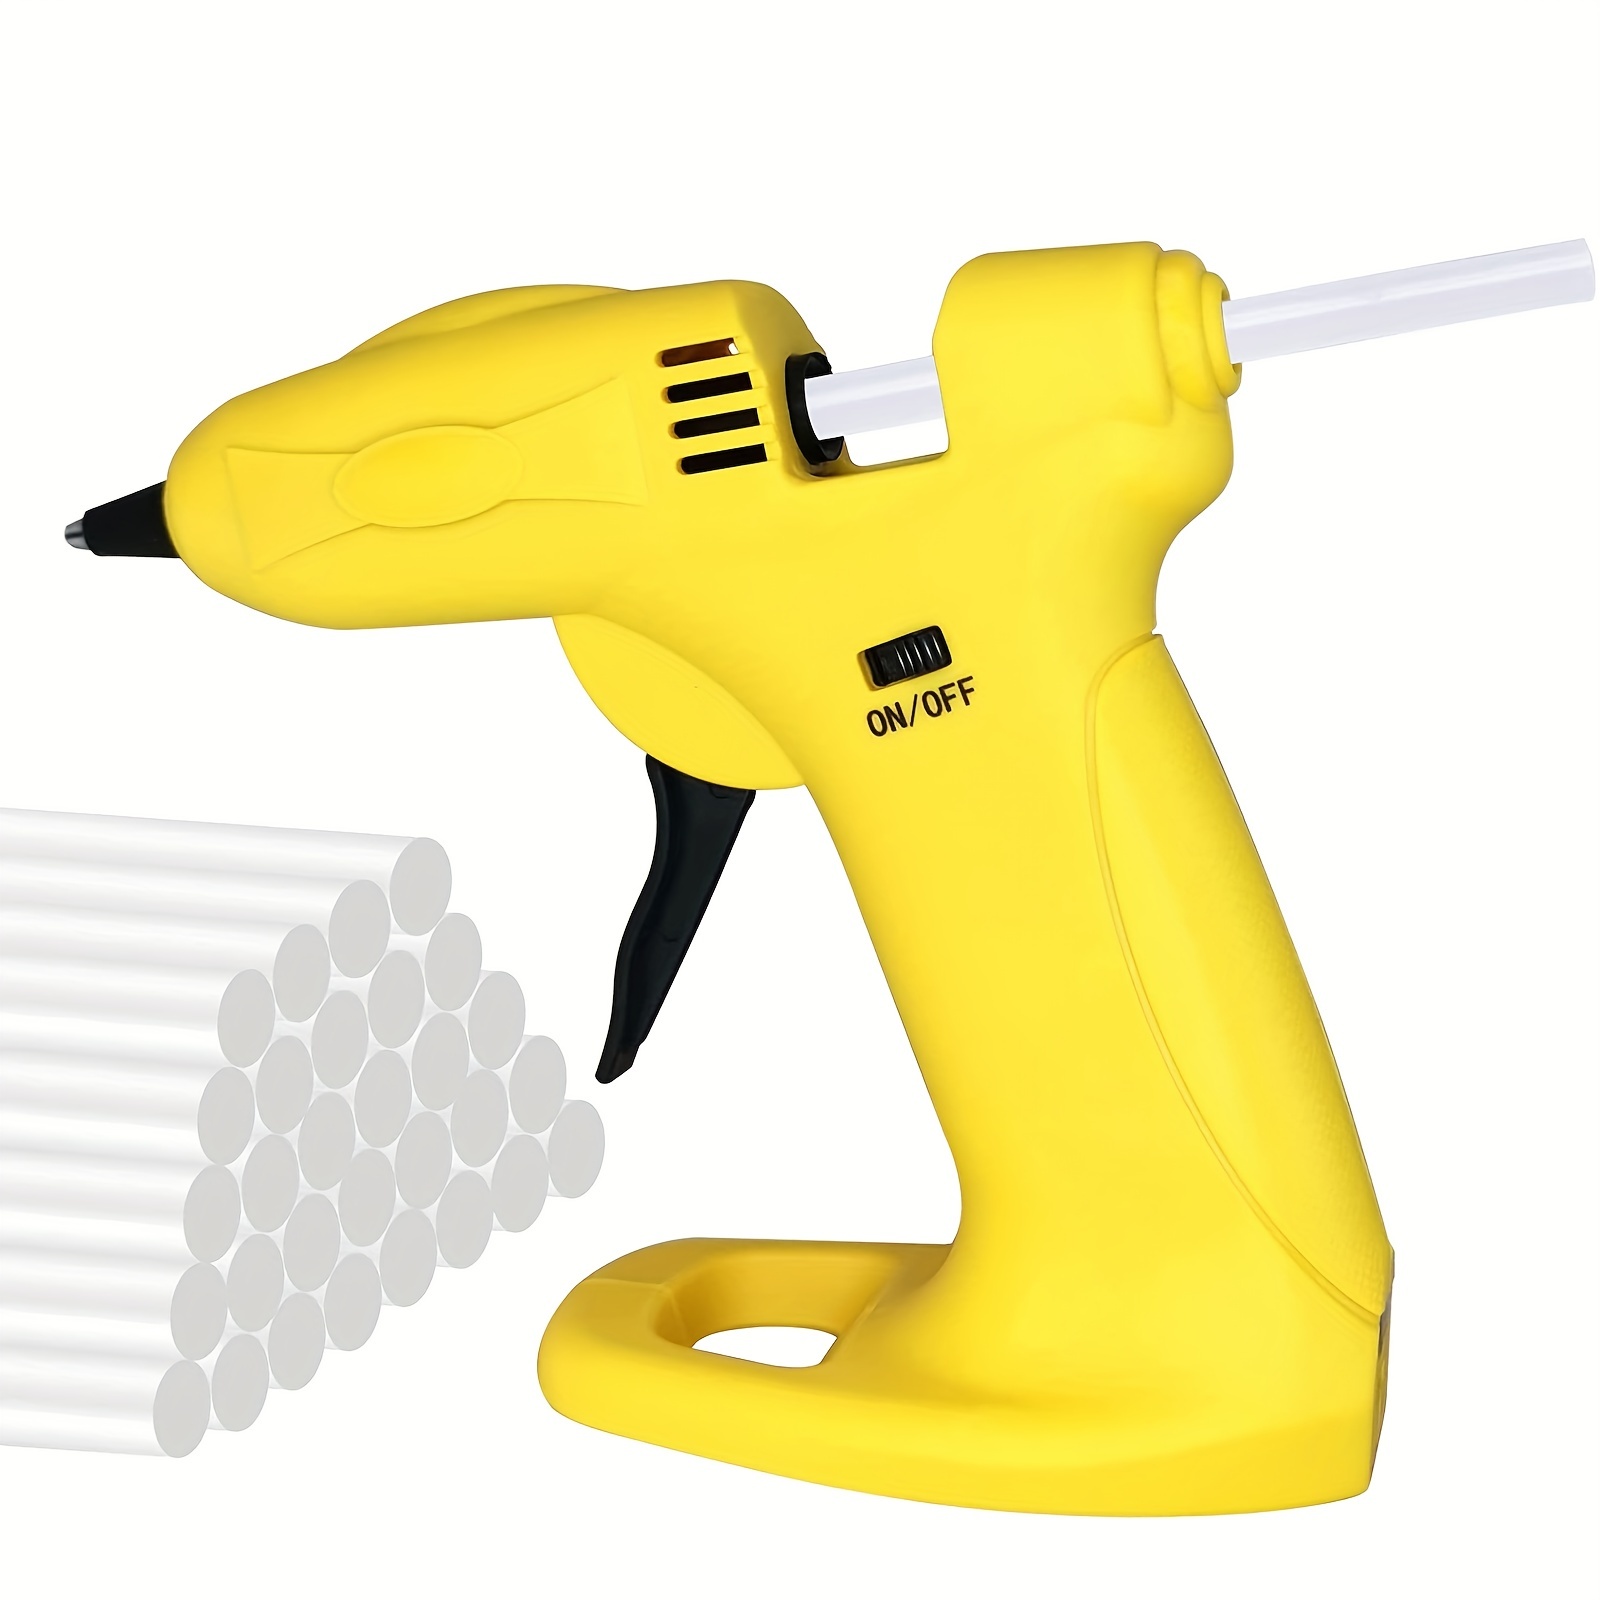 

Cordless Hot Glue Gun, Fast Preheating Glue Gun With 30pcs Glue Sticks, Wireless Usb Rechargeable Anti-drip Portable Mini Melt Glue Kit For Diy Crafts, School Projects And Home Repairs